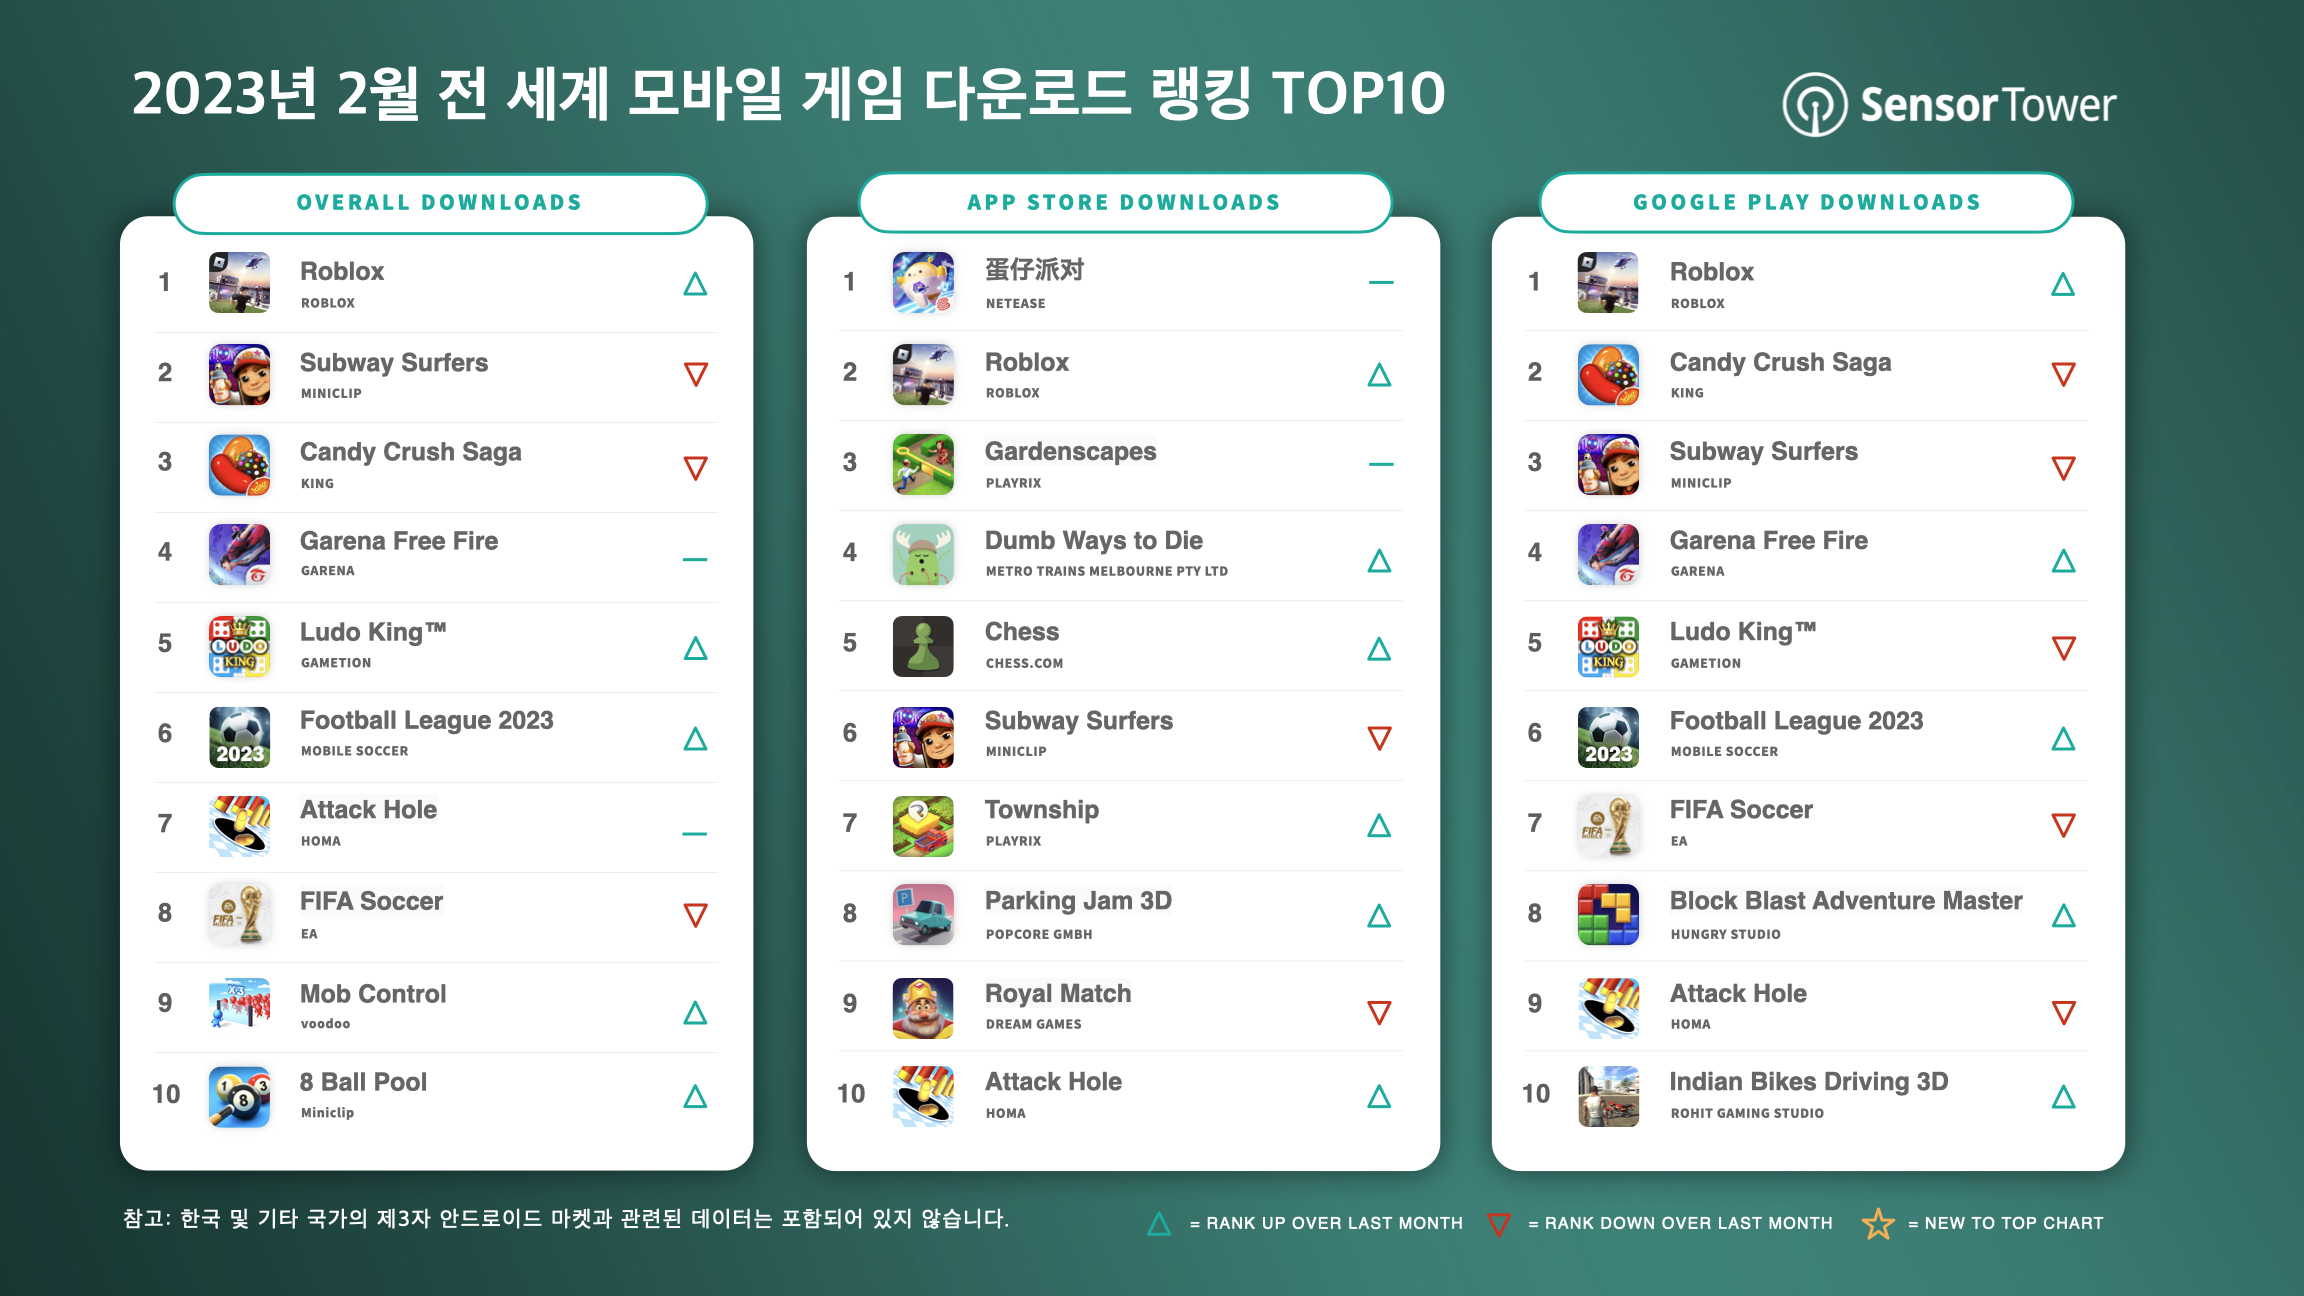 -KR- Top Mobile Games Worldwide for February 2023 by Downloads